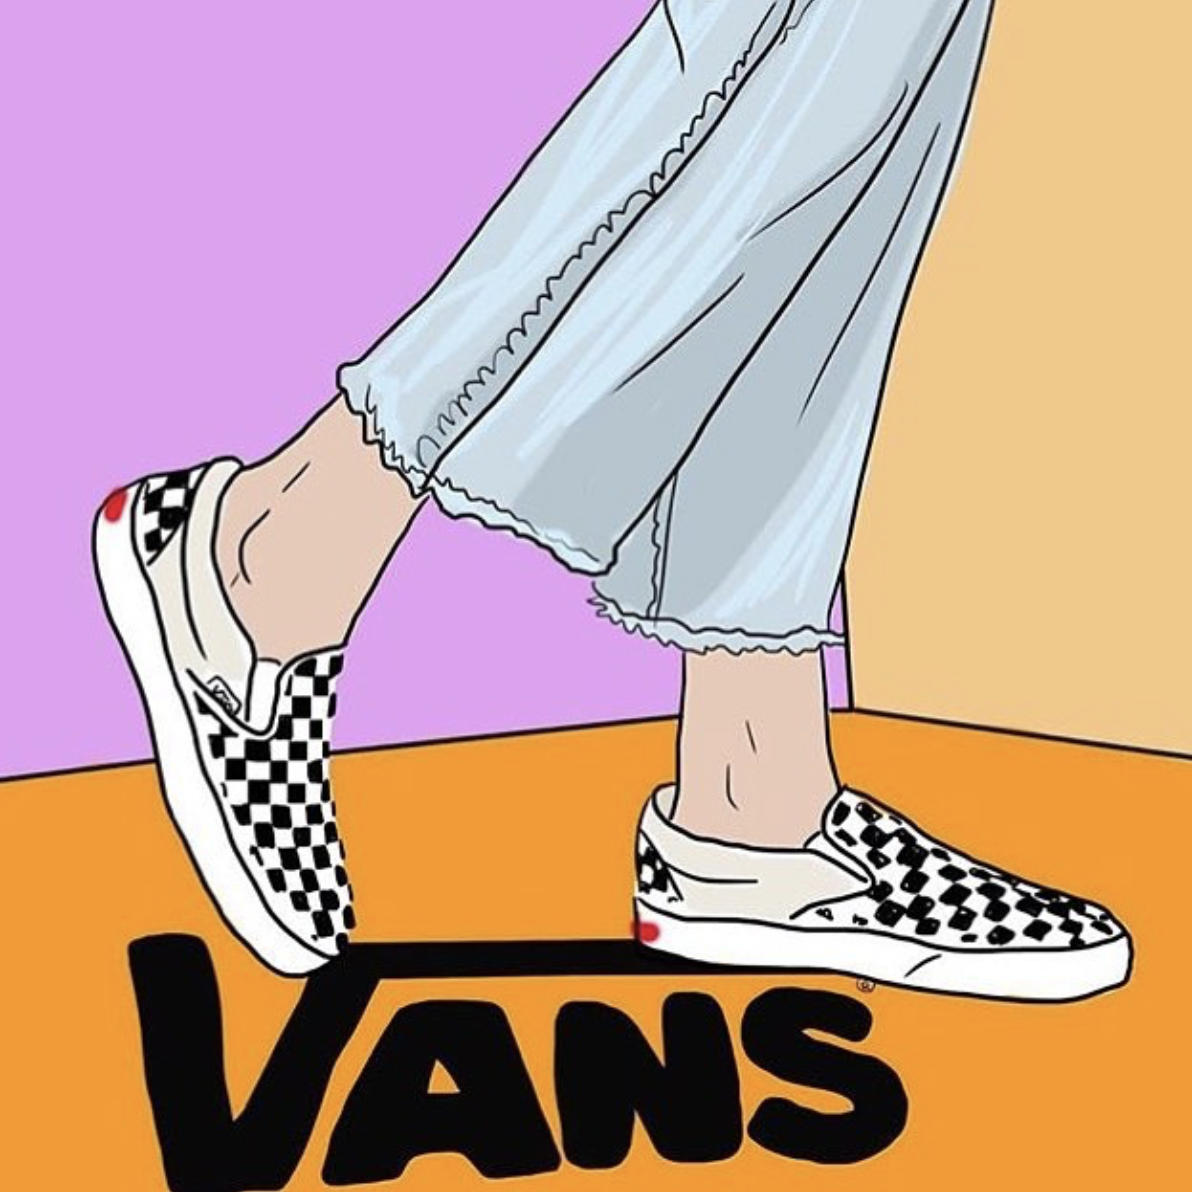 Your weekly art fix by Steph Dalley. Van drawing, Vans logo, Vans off the wall